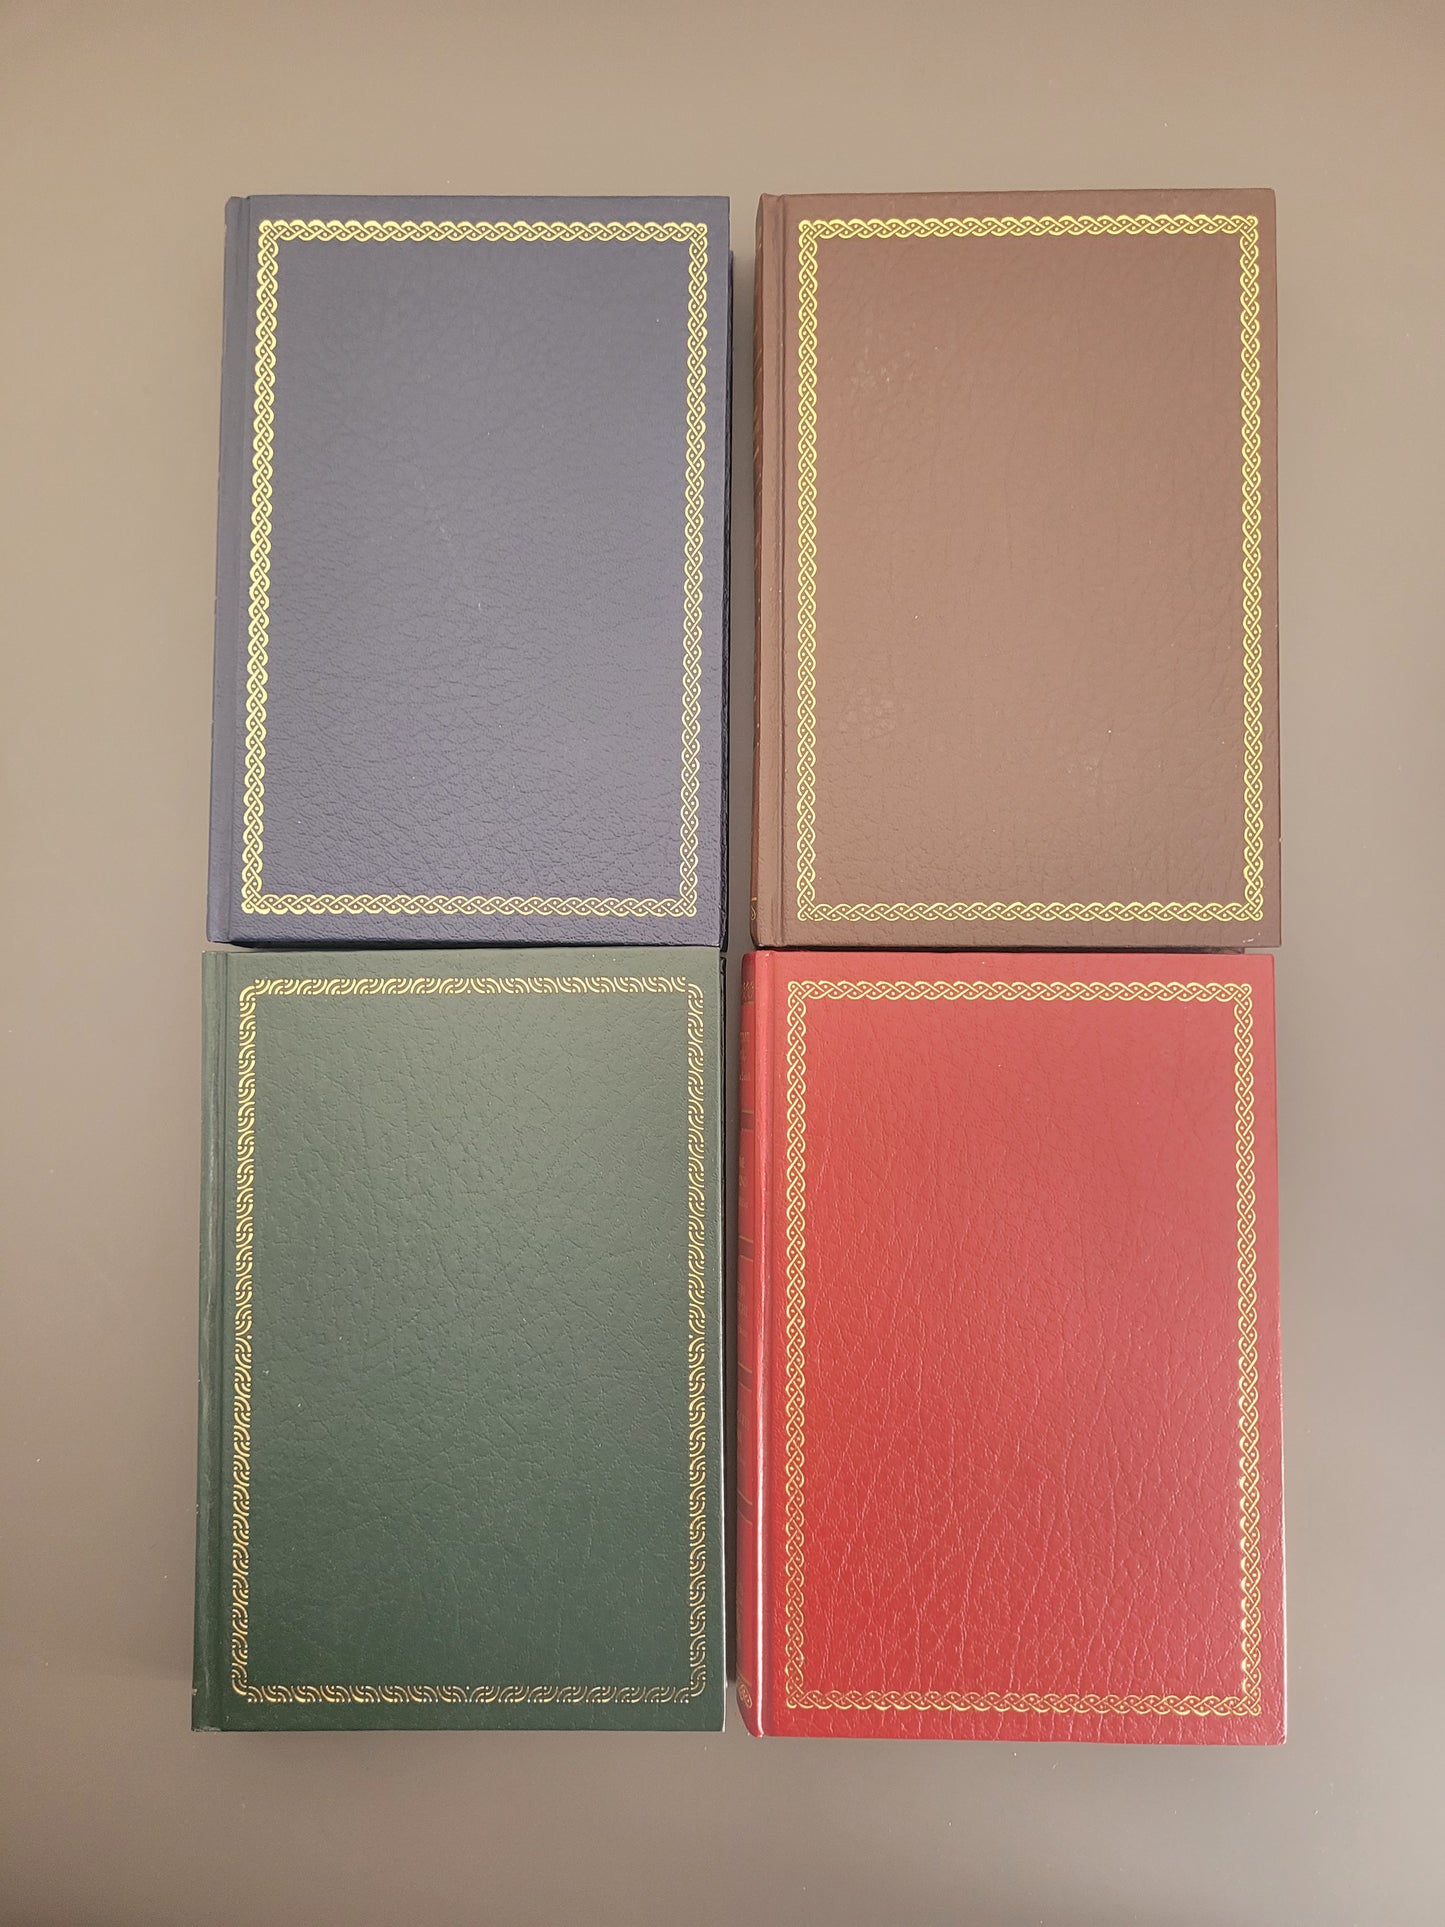 A picture of 4 hardback book - one blue, one brown, one green and one red.